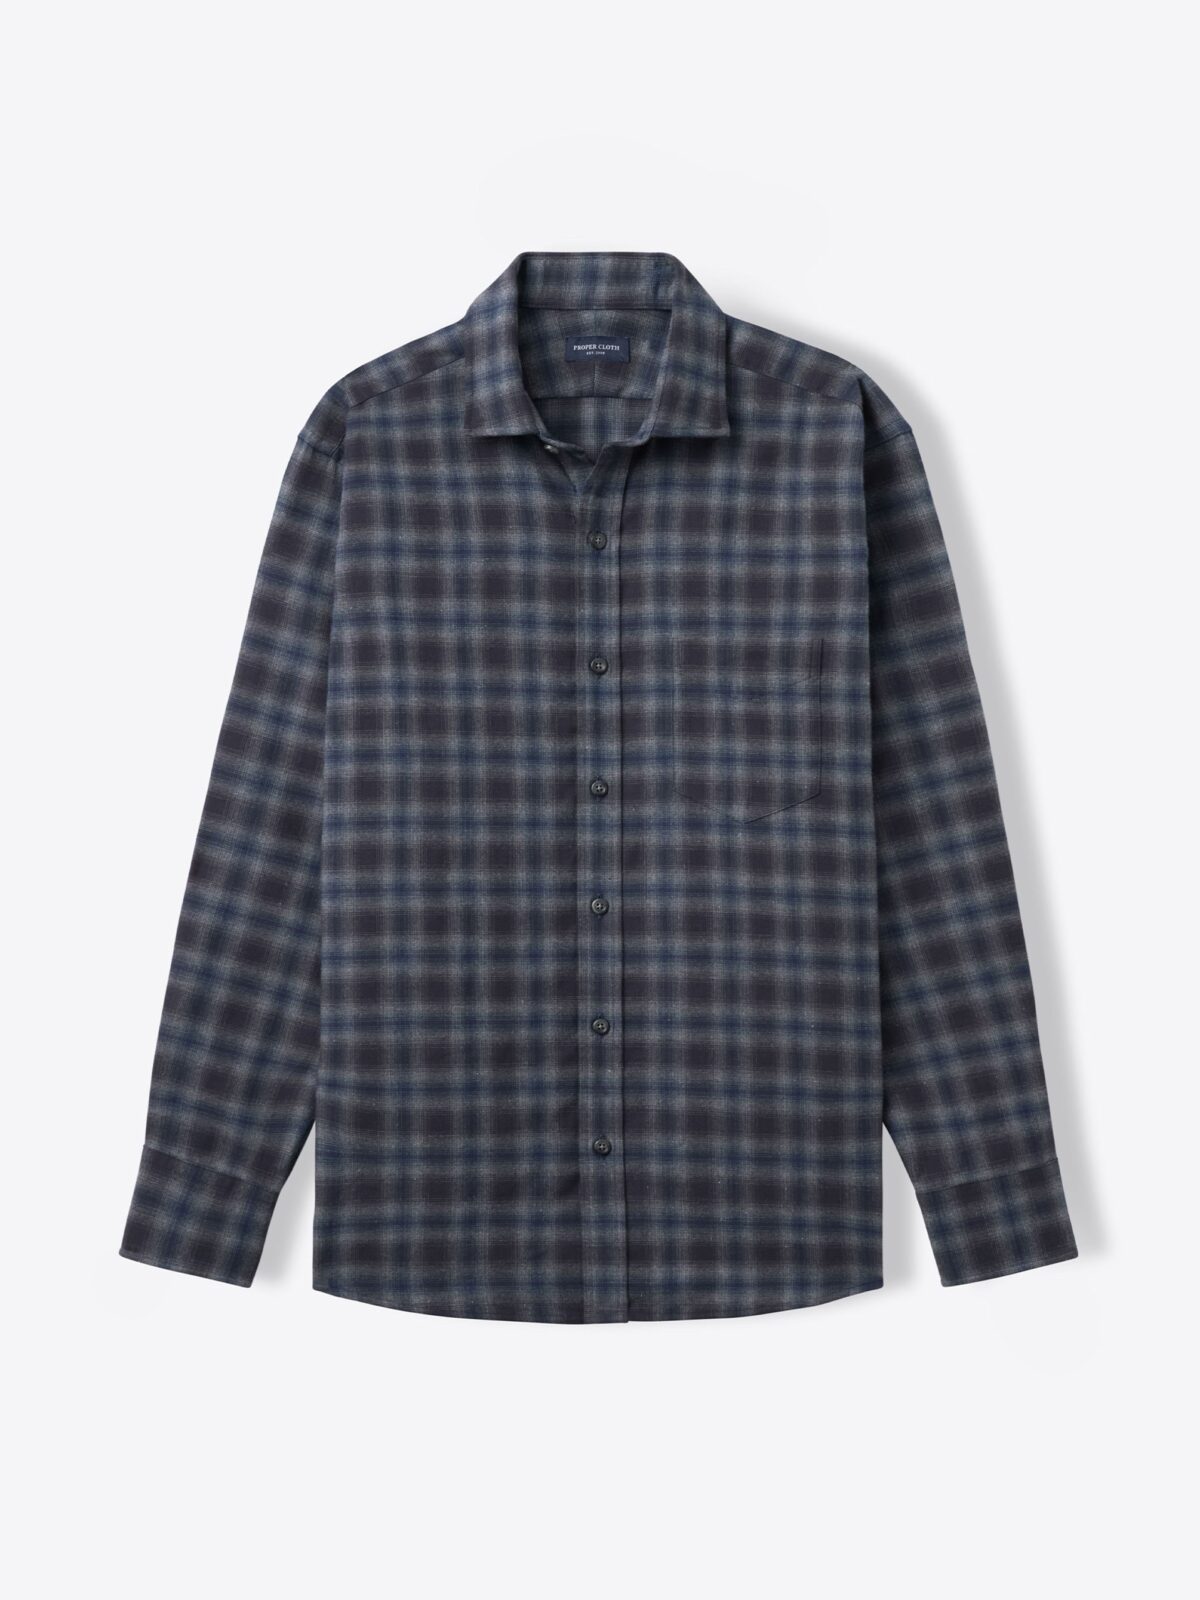 Portuguese Navy and Grey Shadow Check Lightweight Flannel Shirt by